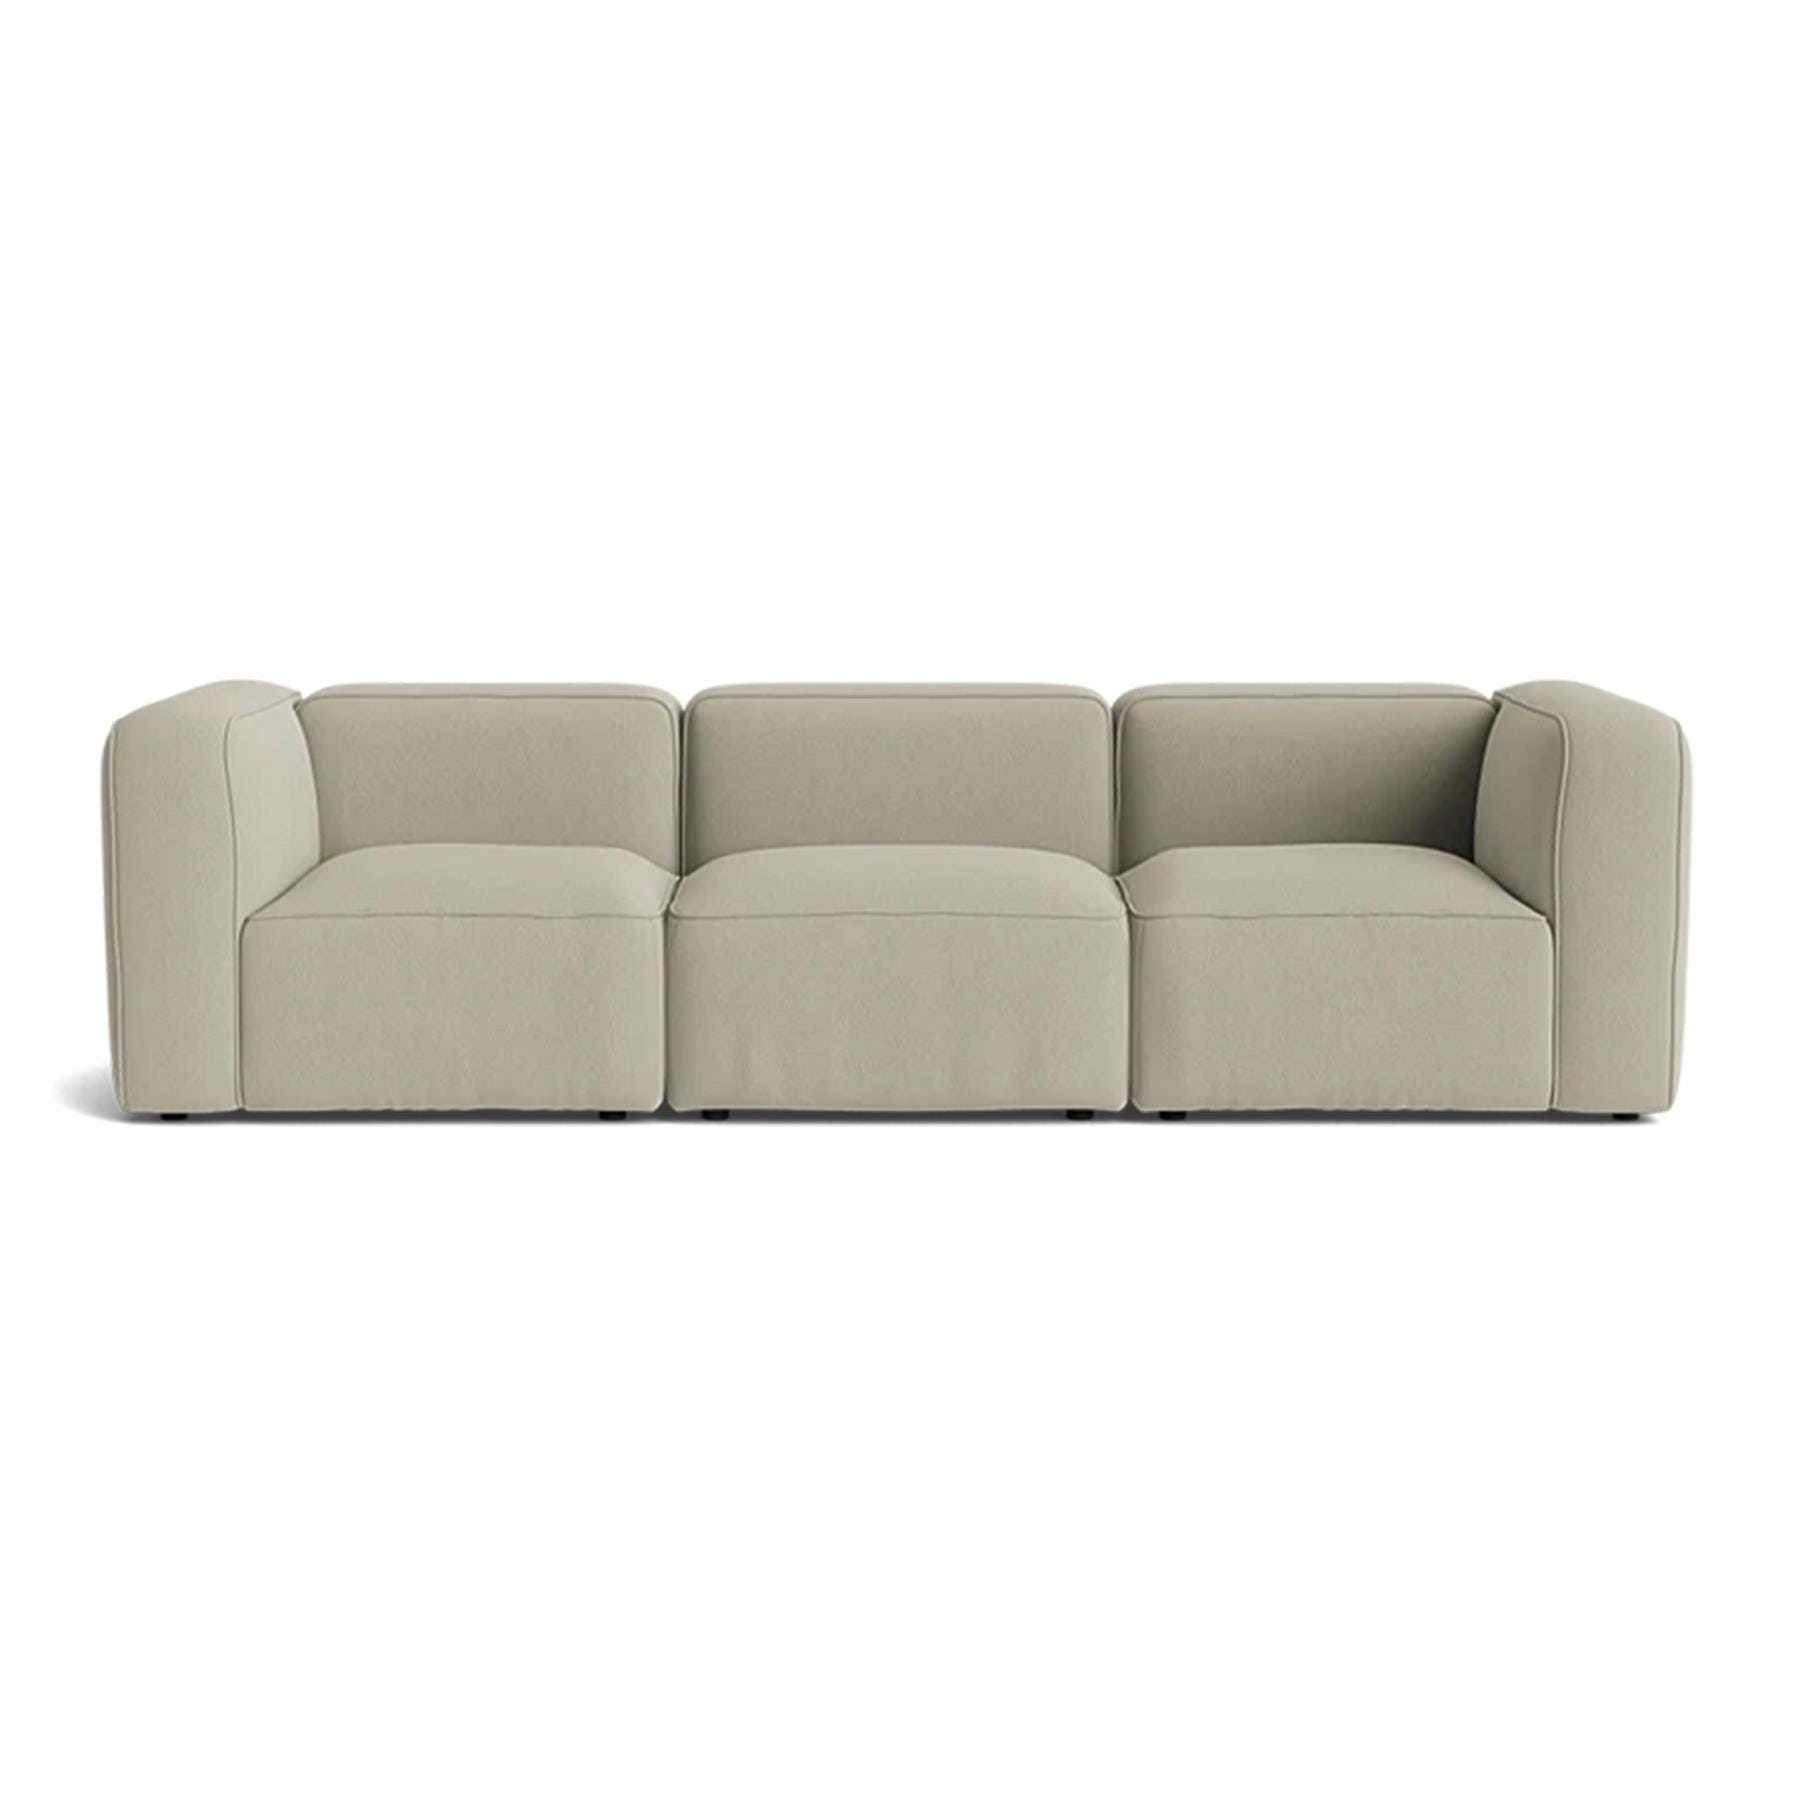 Make Nordic Basecamp 3 Seater Sofa Fiord 322 Brown Designer Furniture From Holloways Of Ludlow